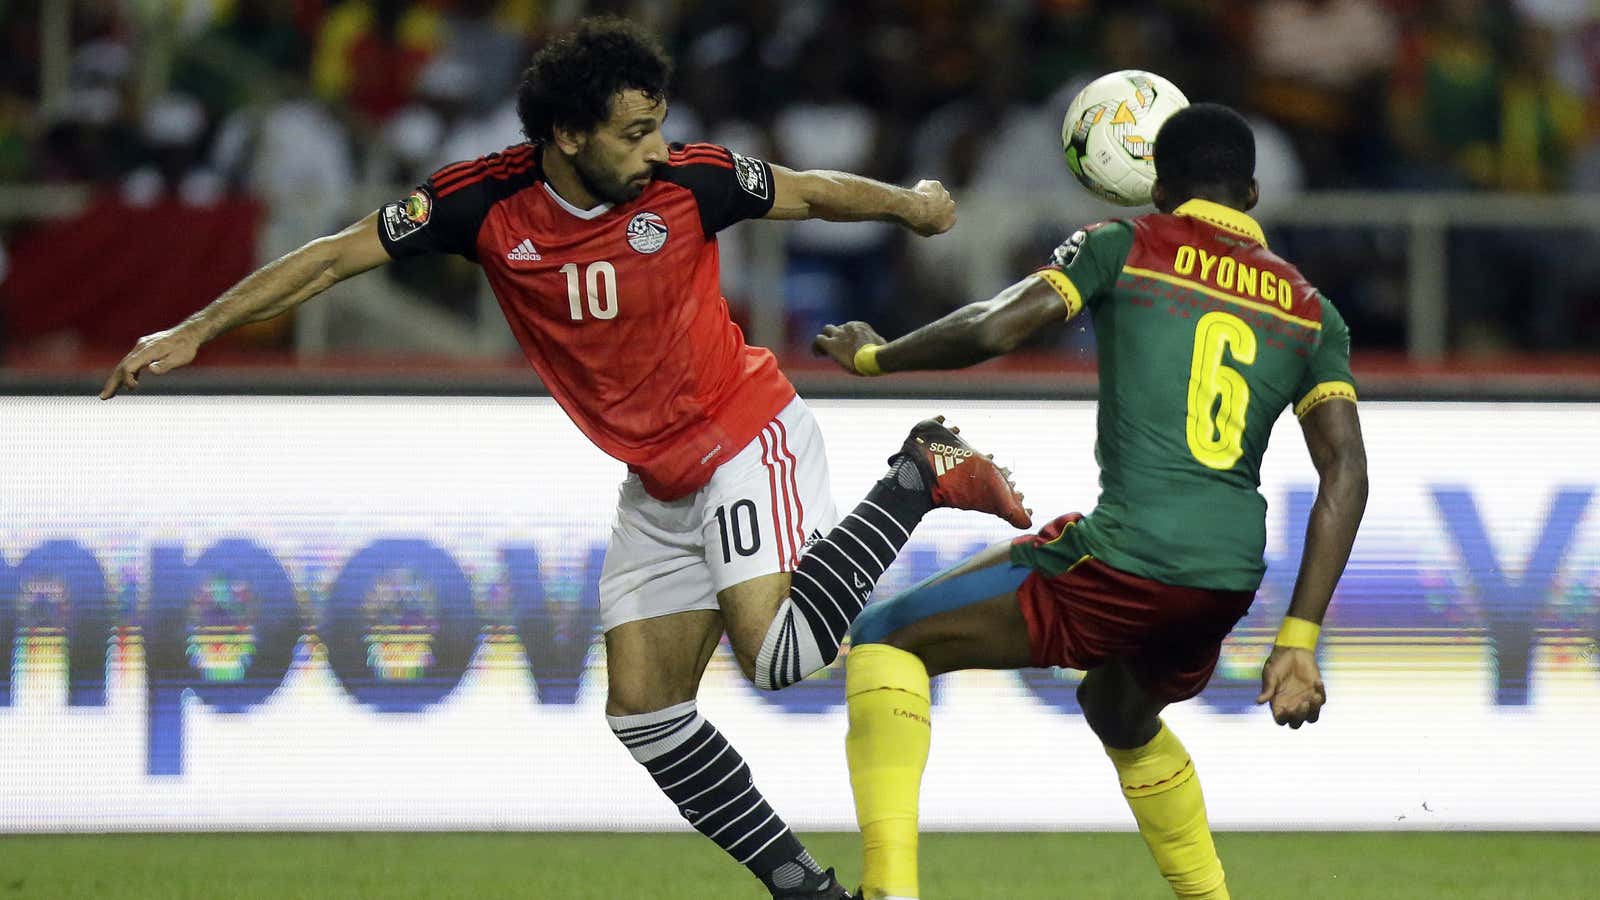 Egypt’s Mohamed Salah playing against Cameroon in the 2017 Afcon final.